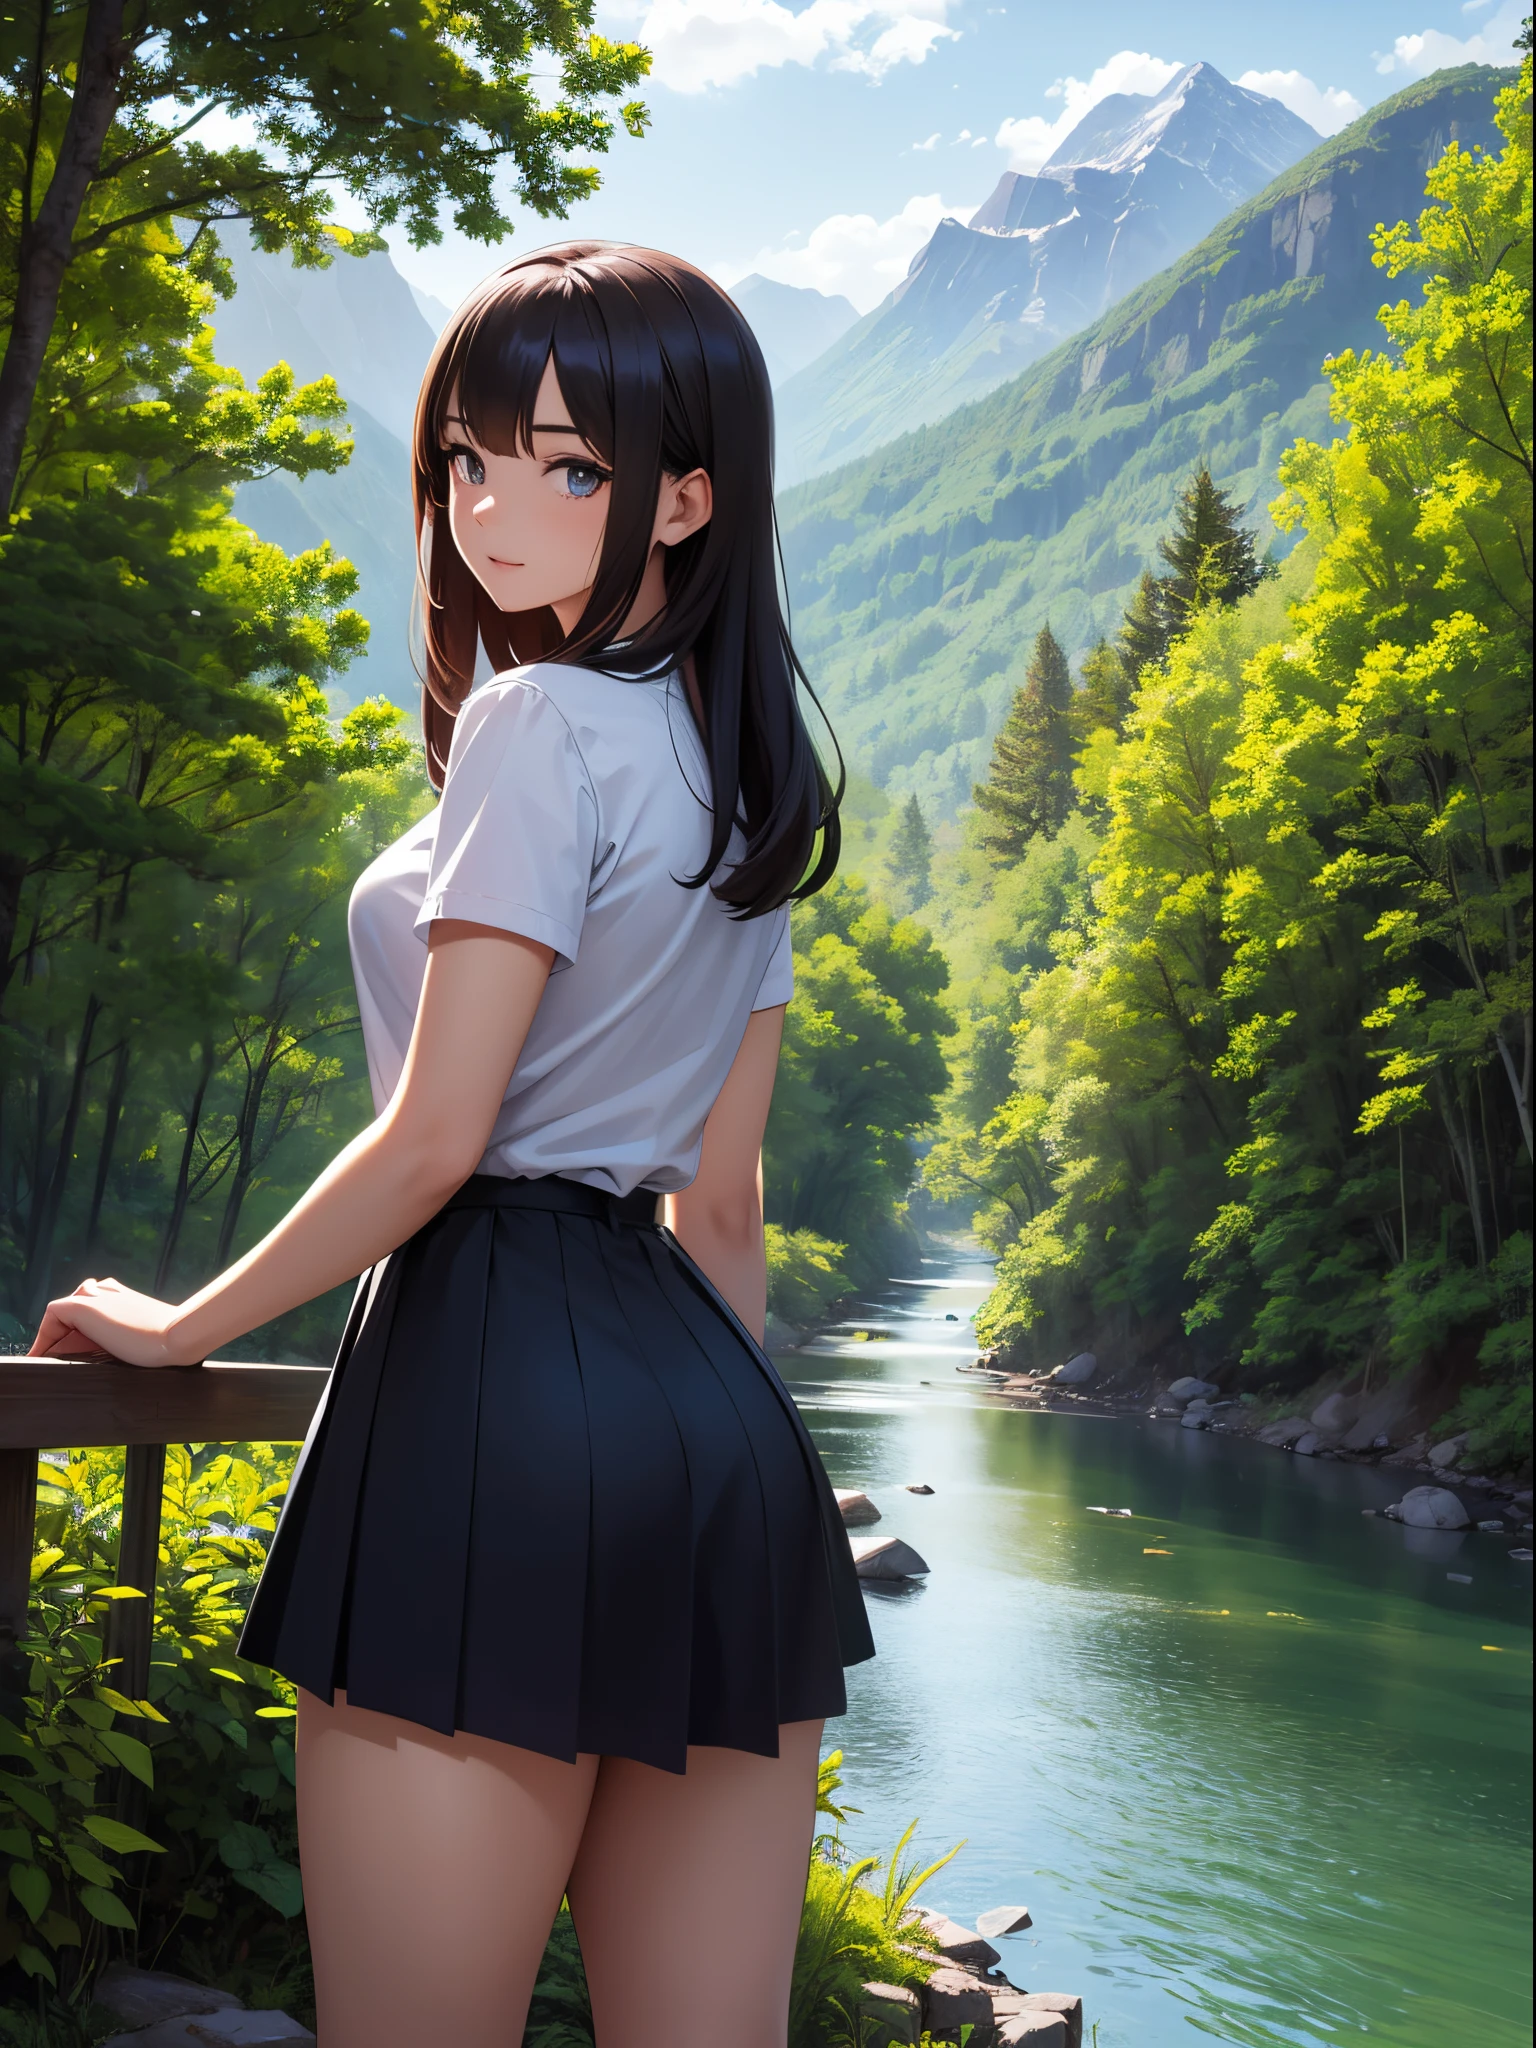 High resolution, masutepiece, High quality, High Definition, Focus on the face of one young woman, human figure, Overlooking the large forest from behind, Mountain scenery, forest, Nature, River